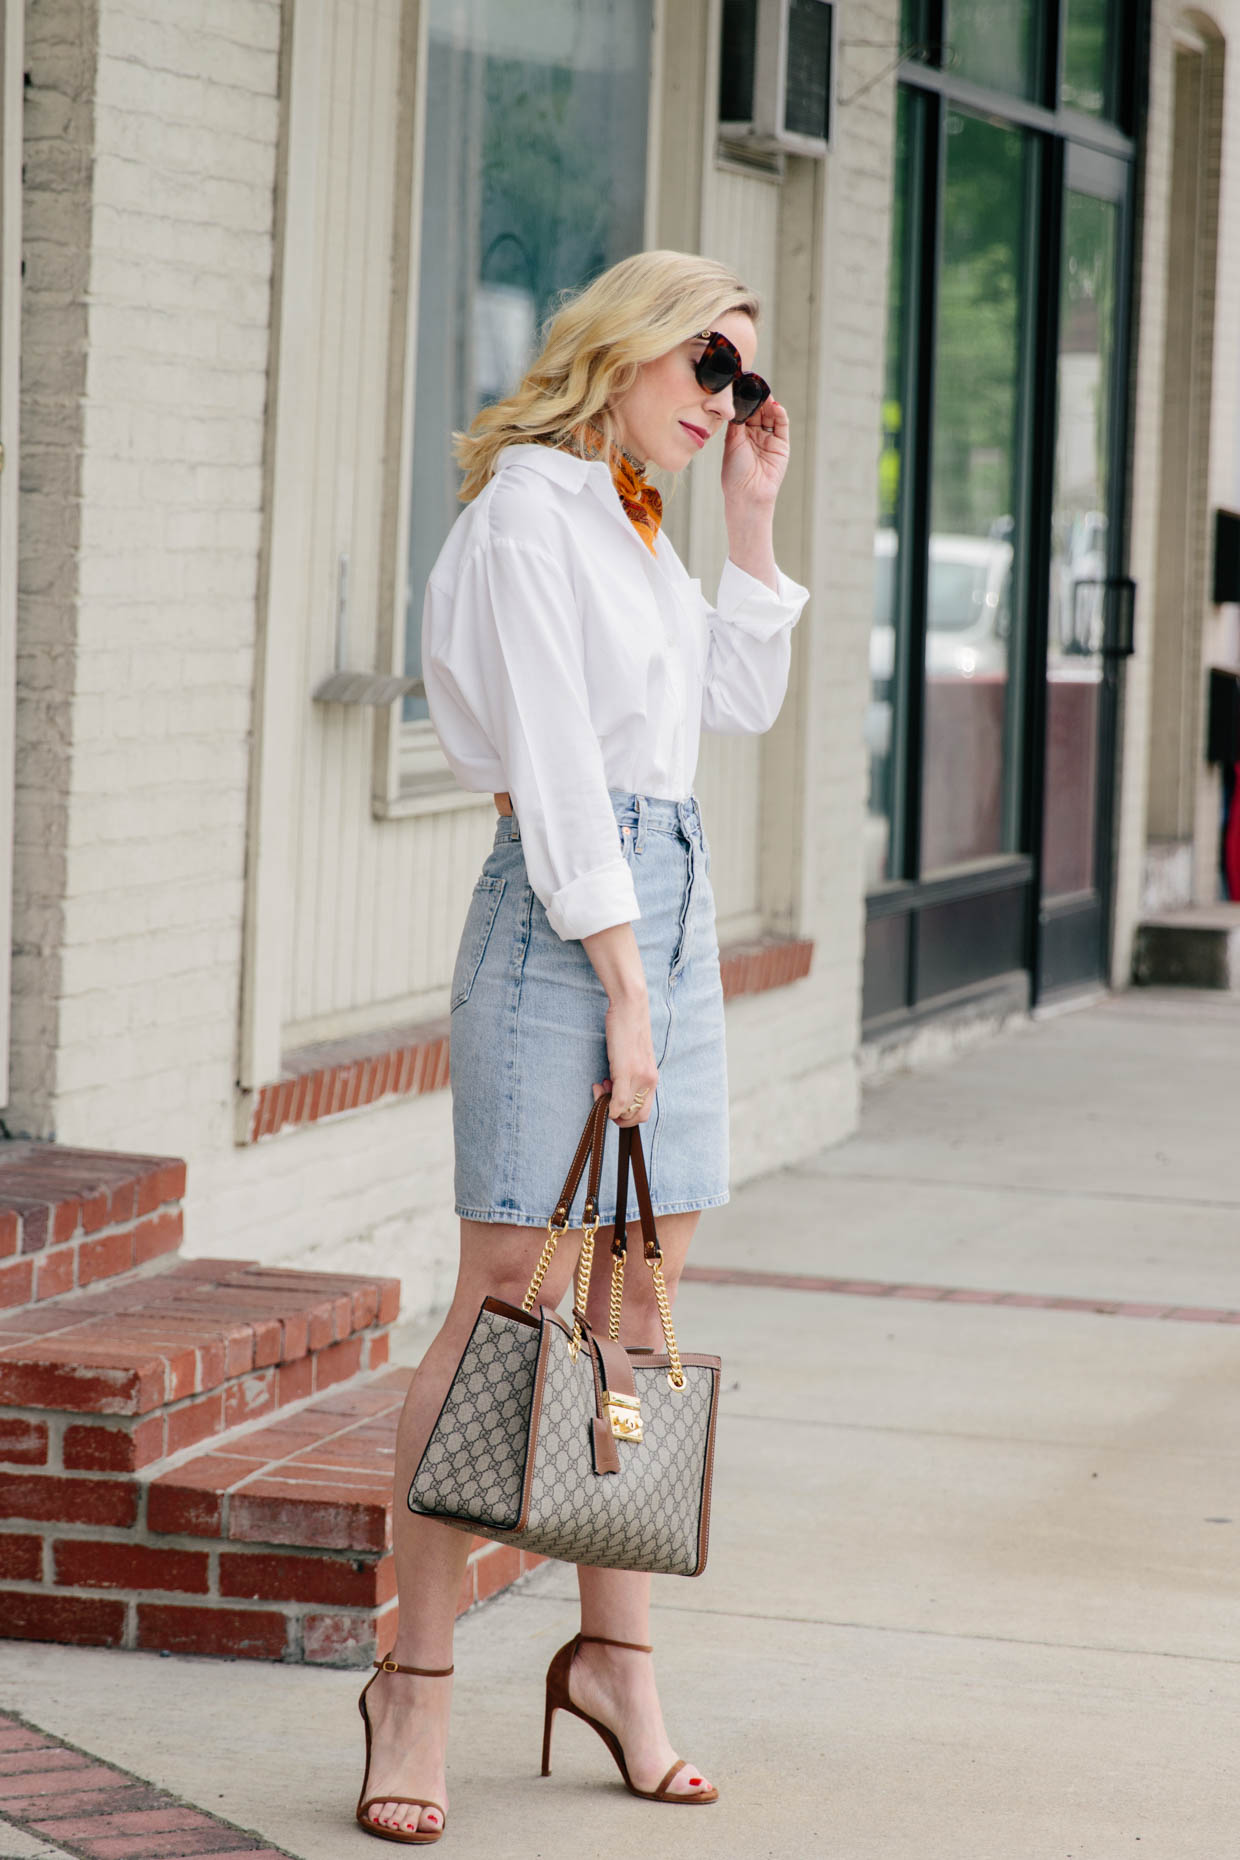 A Denim Skirt Outfit for Date Night - Meagan's Moda